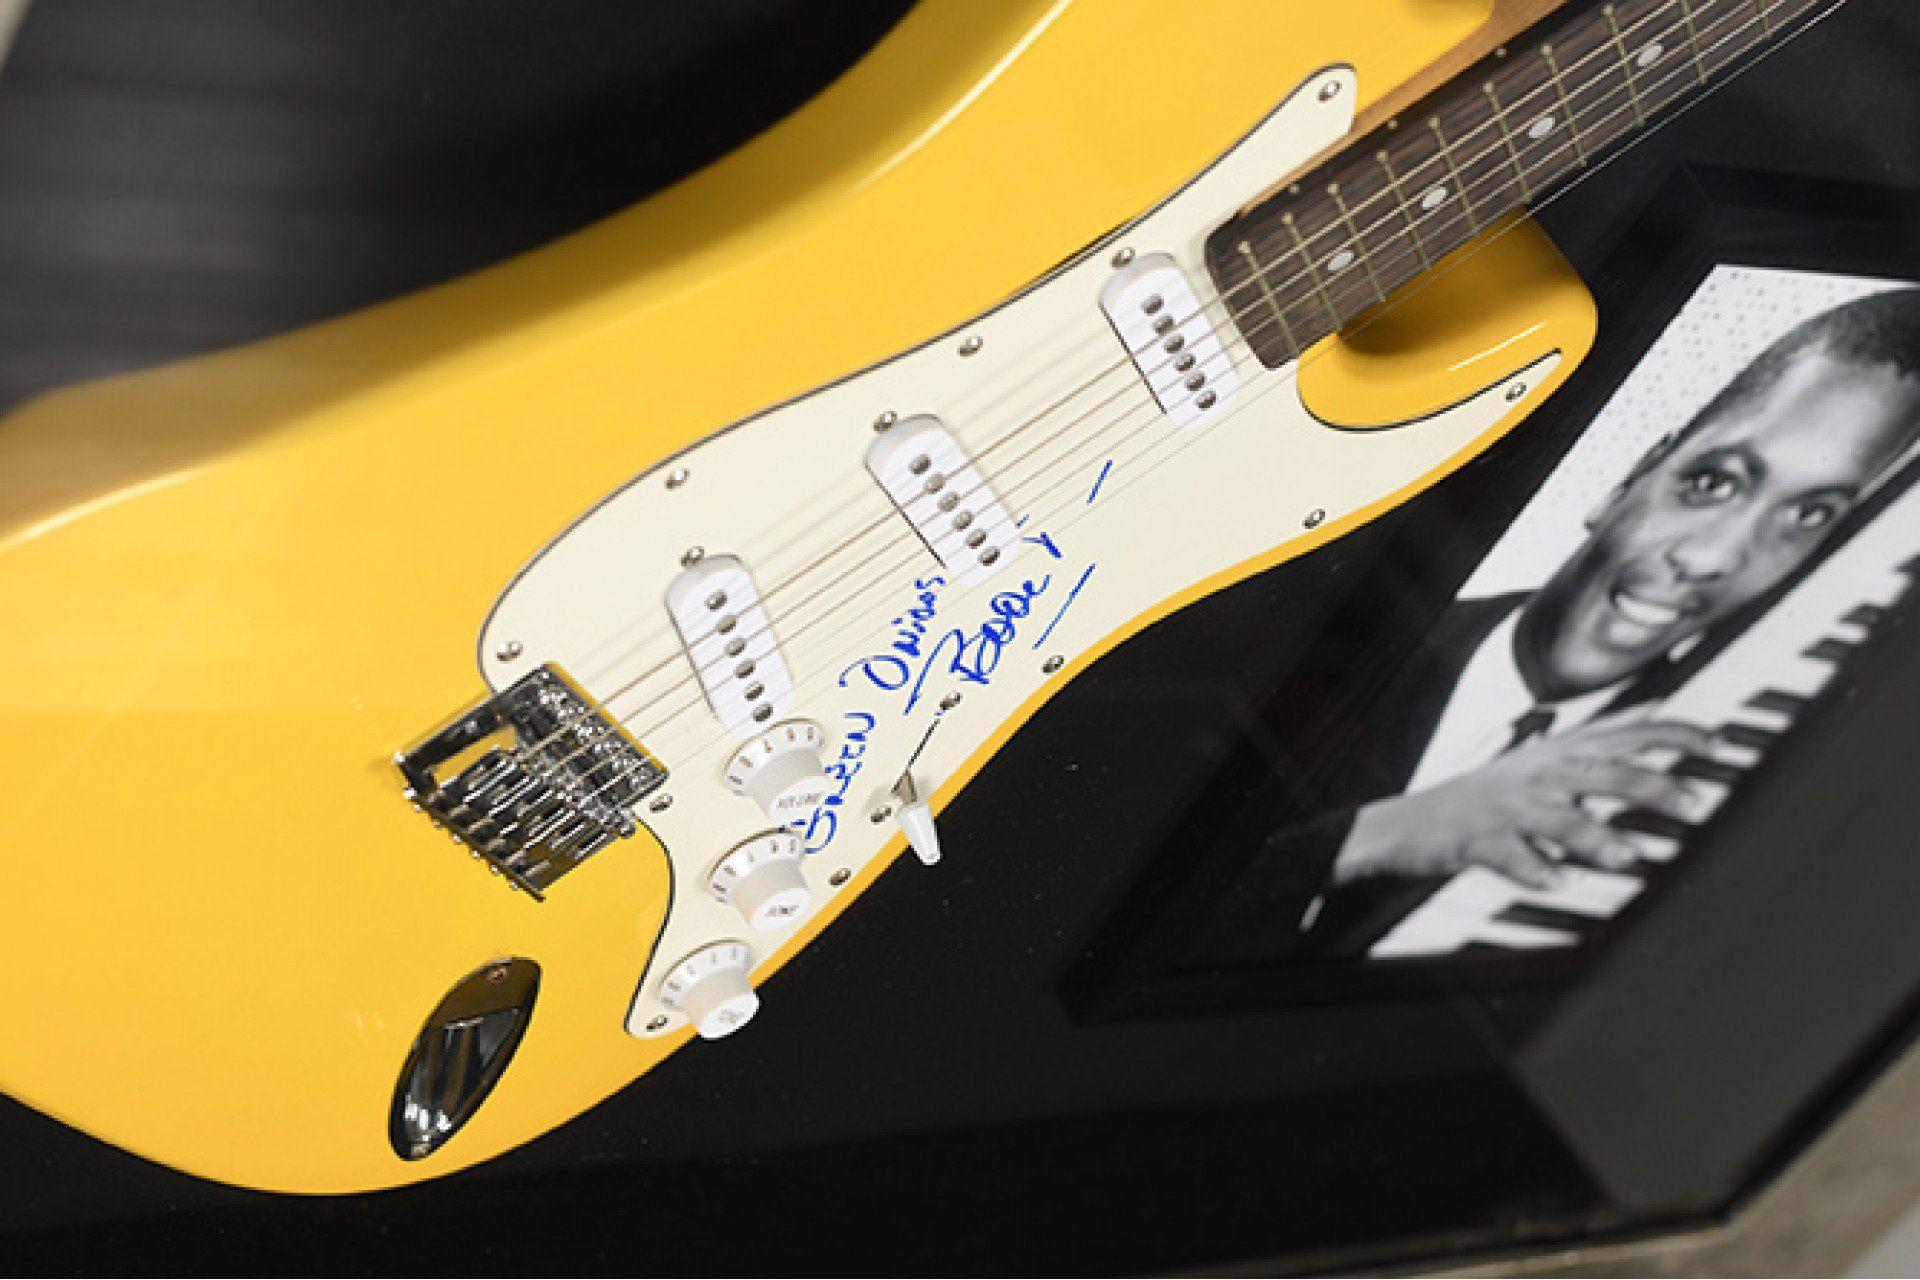 Framed Guitar with Authenticated Booker T signature